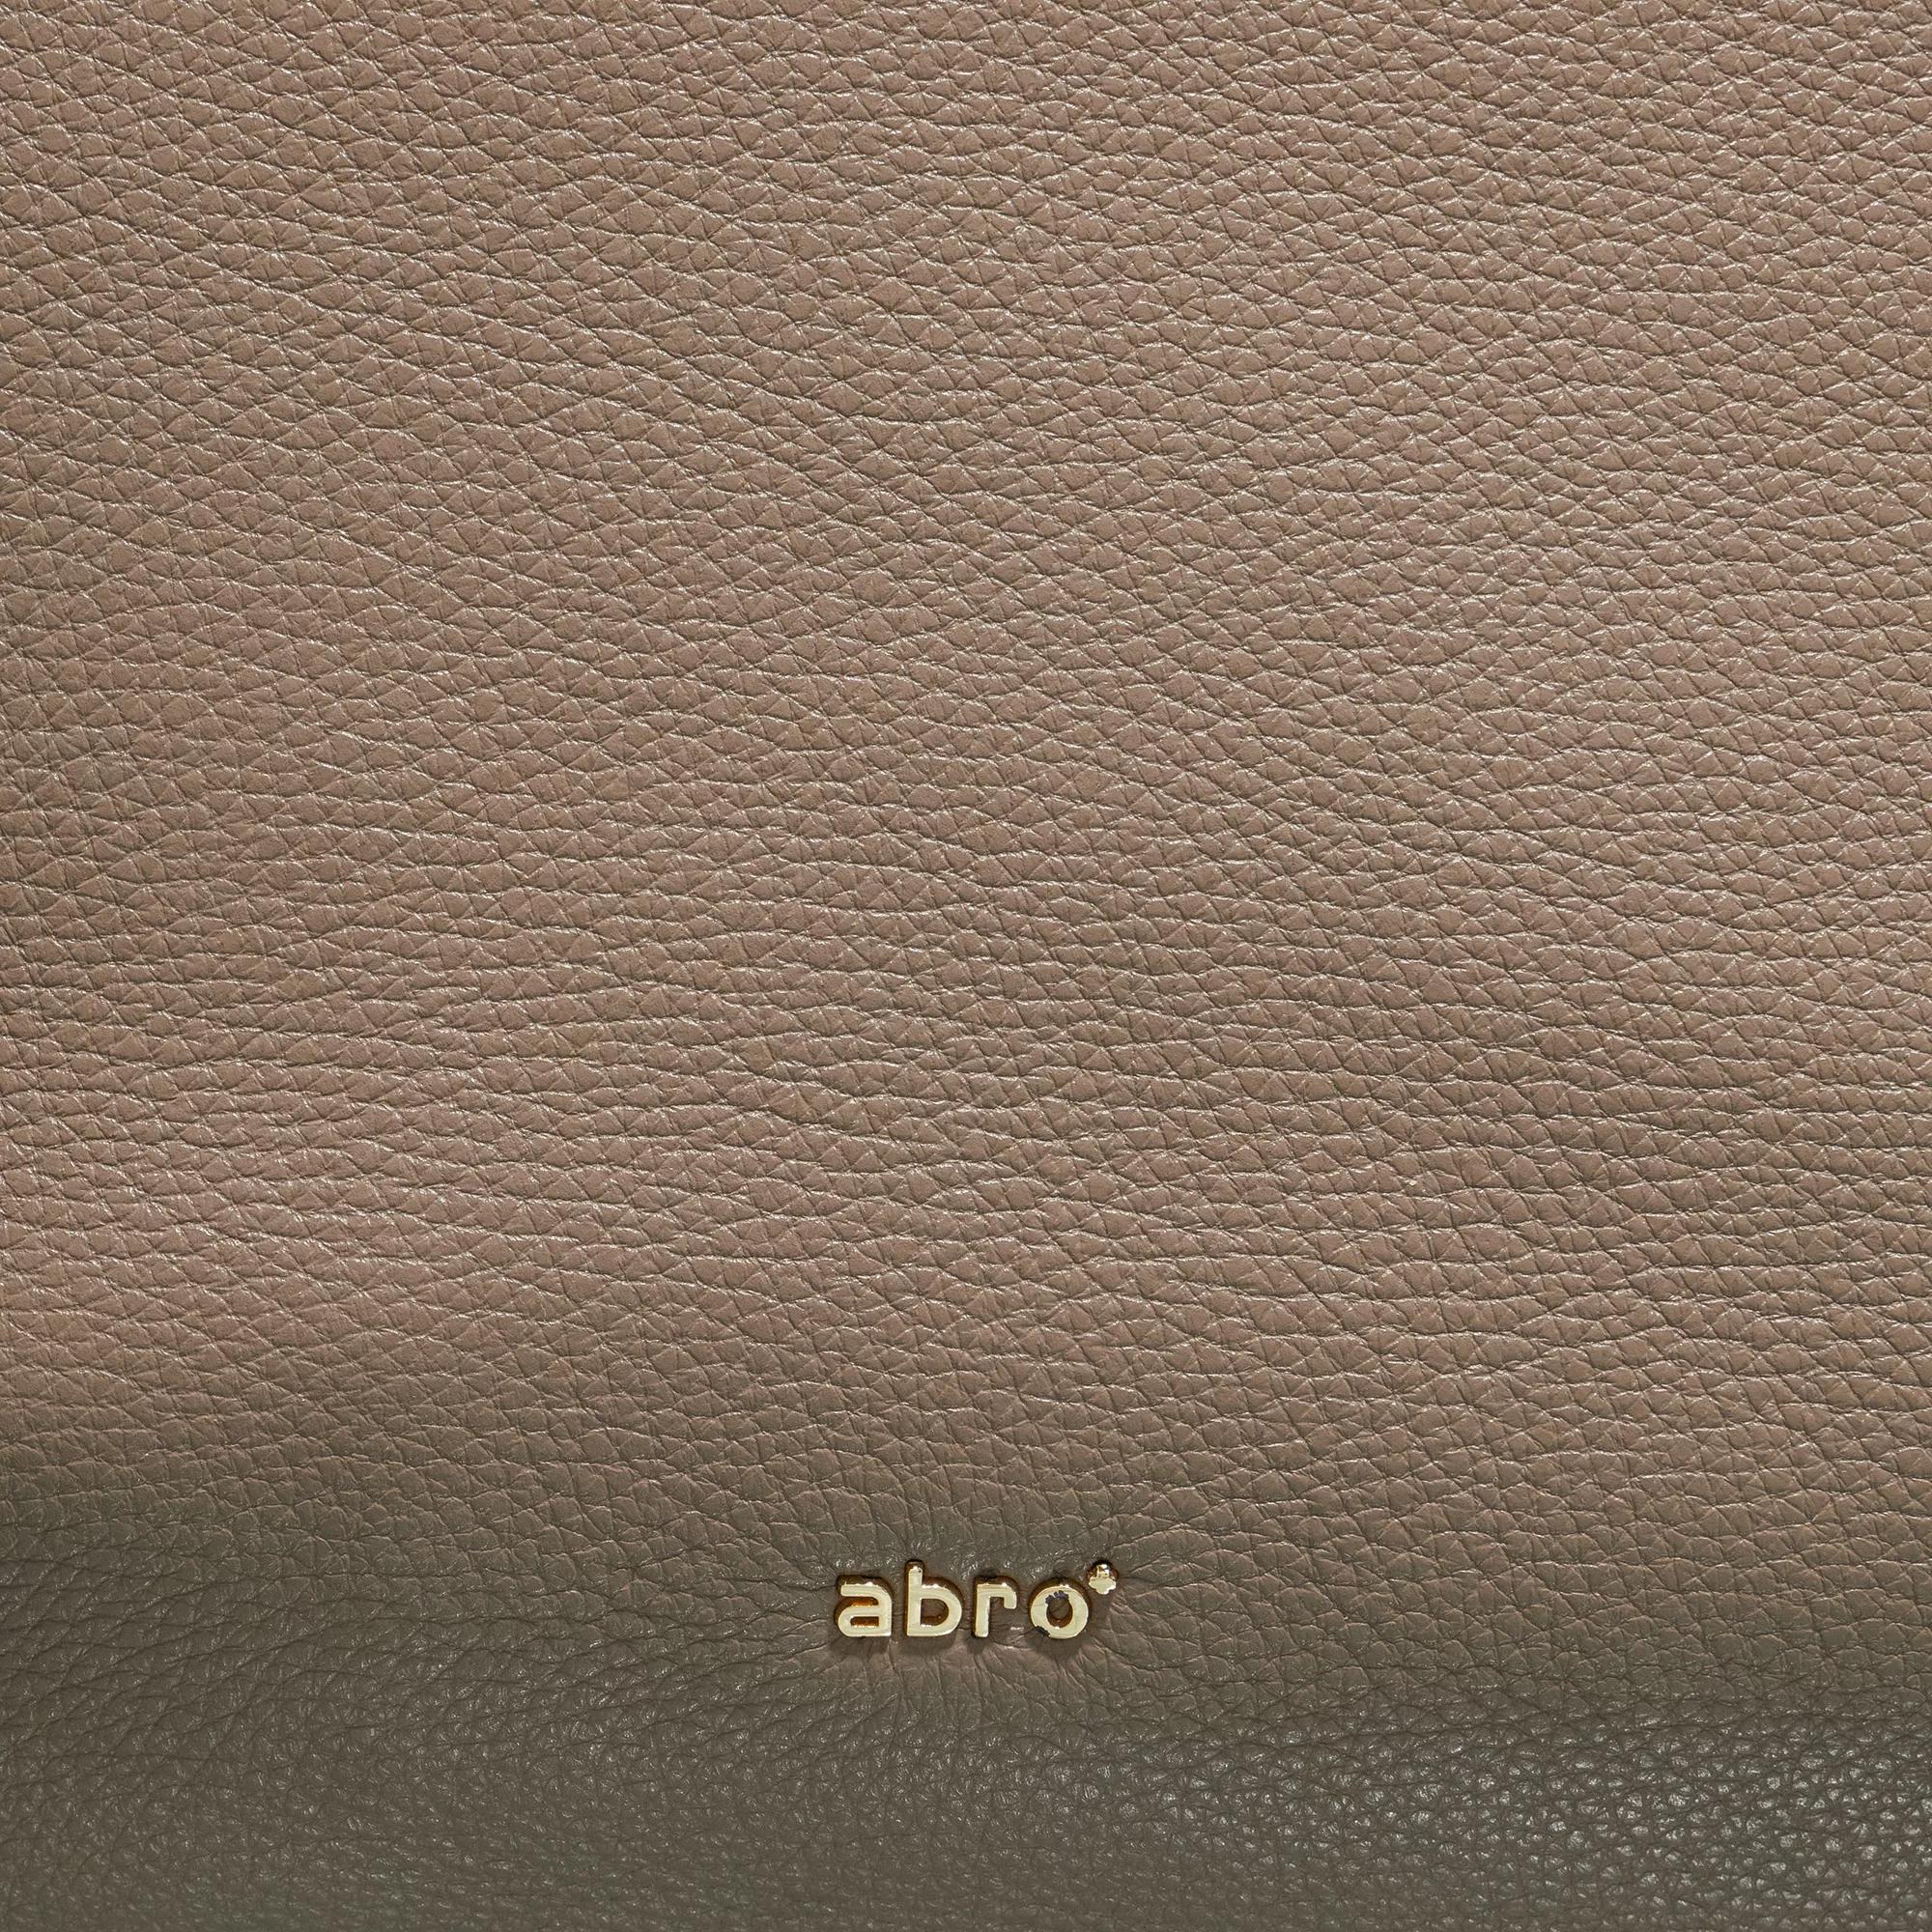 abro Crossbody bags Beutel Kaia in taupe